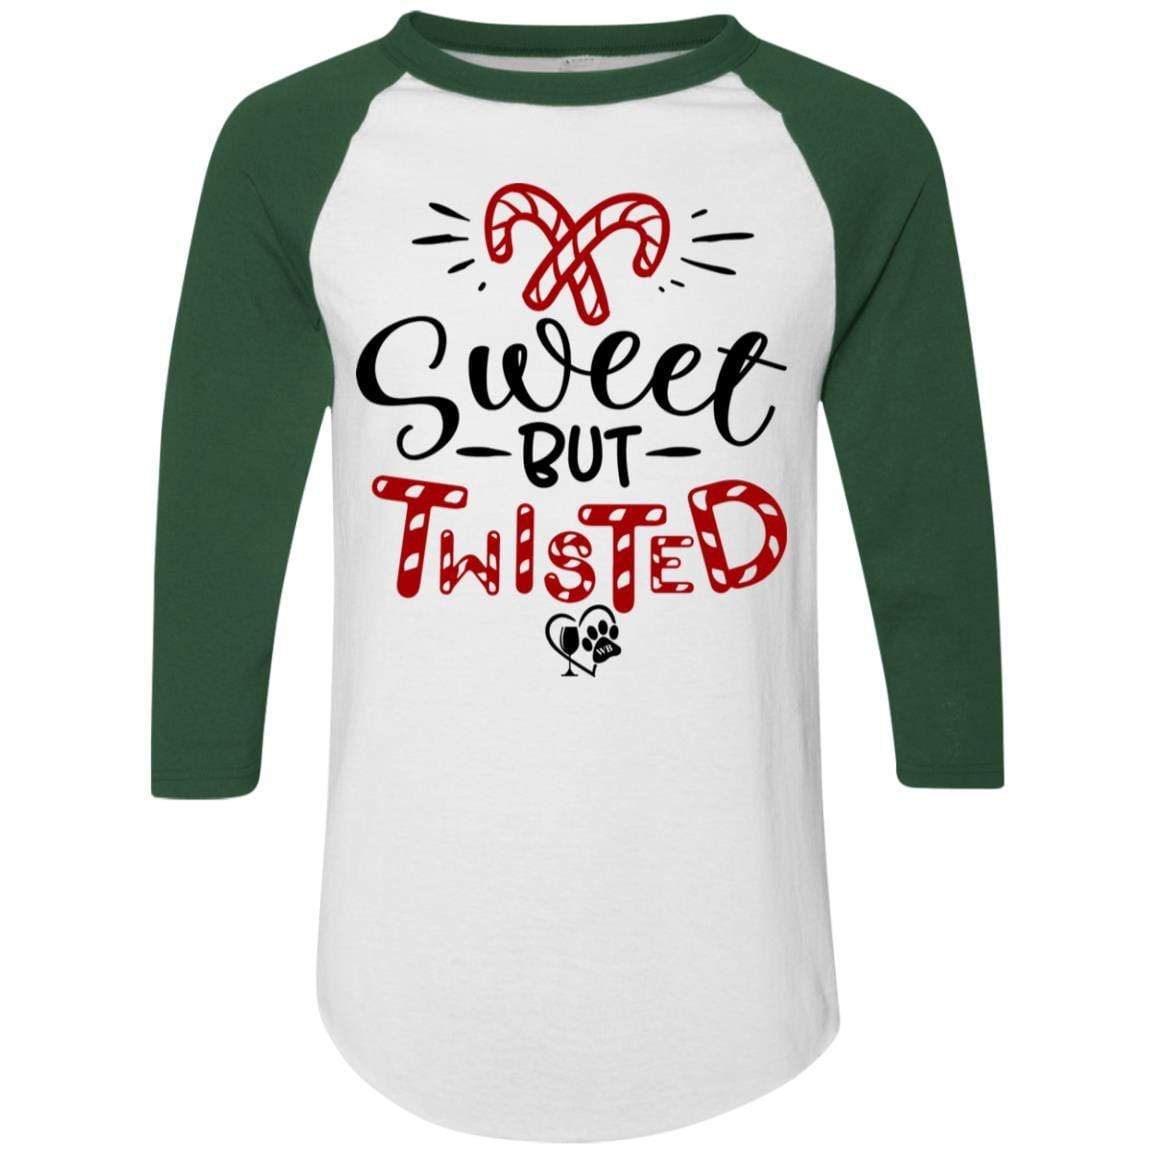 T-Shirts White/Dark Green / S WineyBitches.Co "Sweet But Twisted" Holiday Colorblock Raglan Jersey WineyBitchesCo